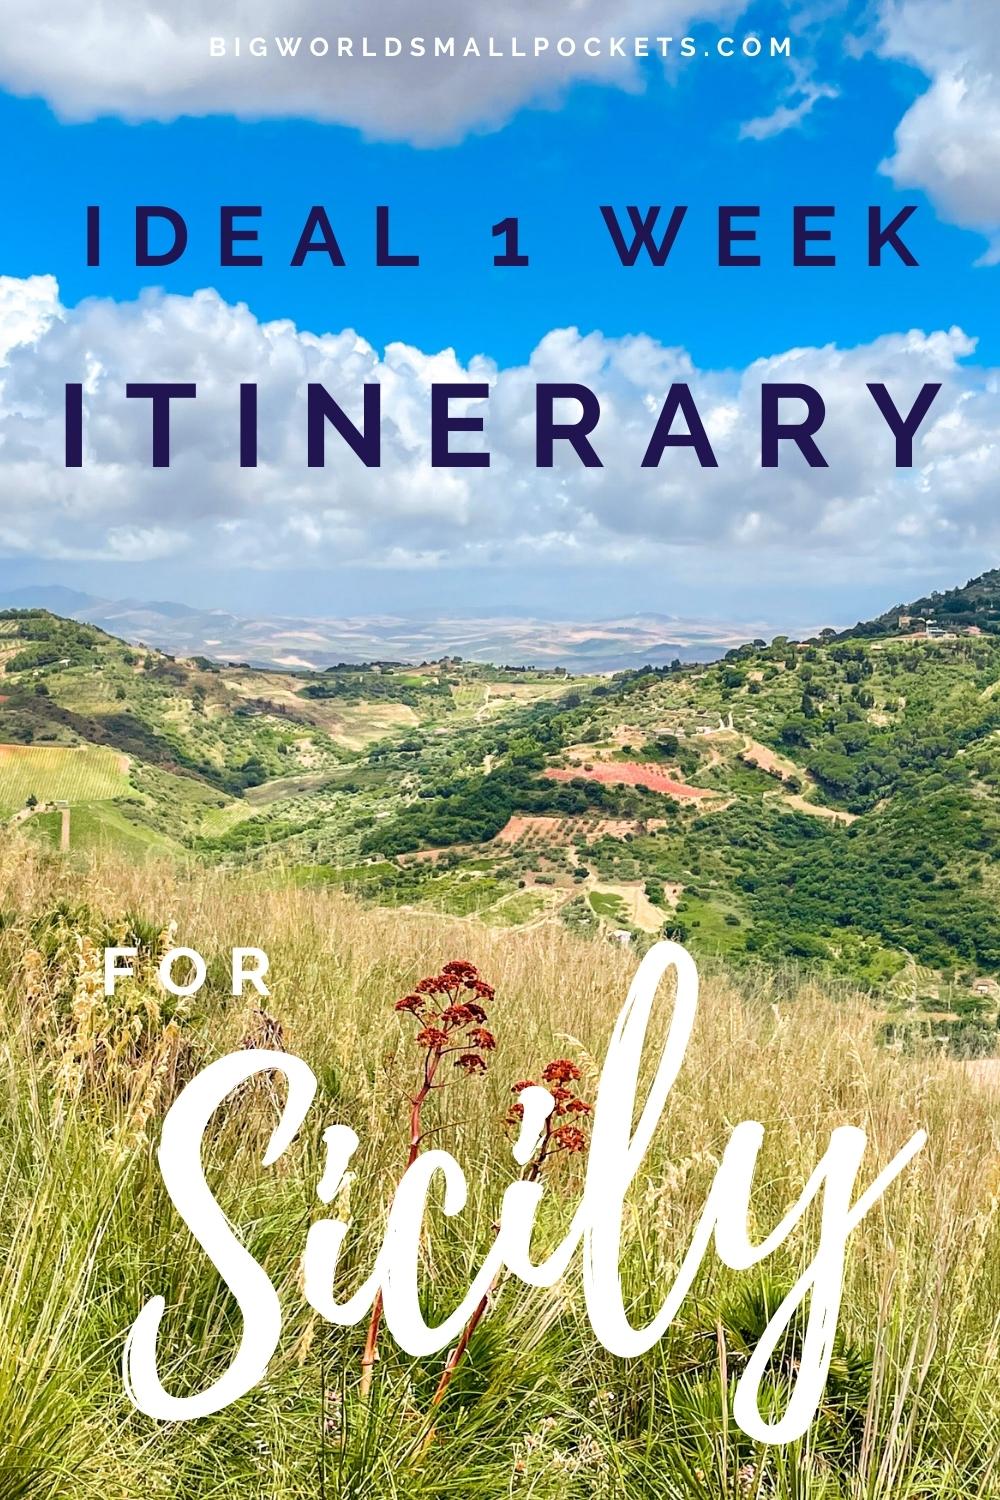 The Ideal 1 Week Sicily Itinerary